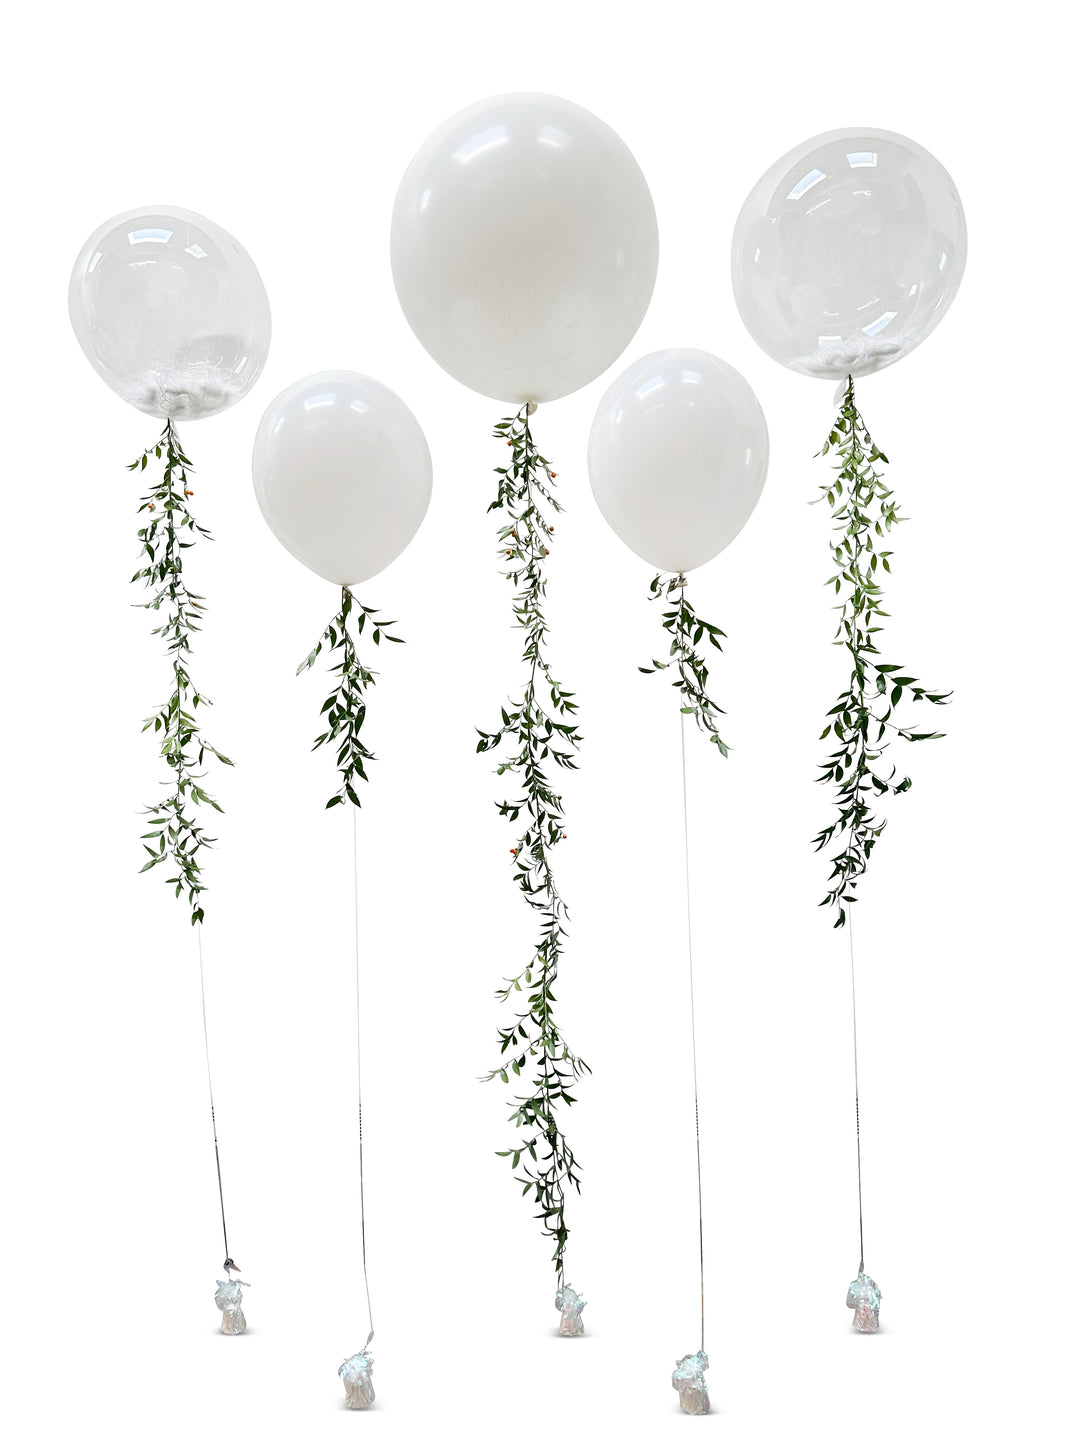 White balloons with greenery (contact for pricing)